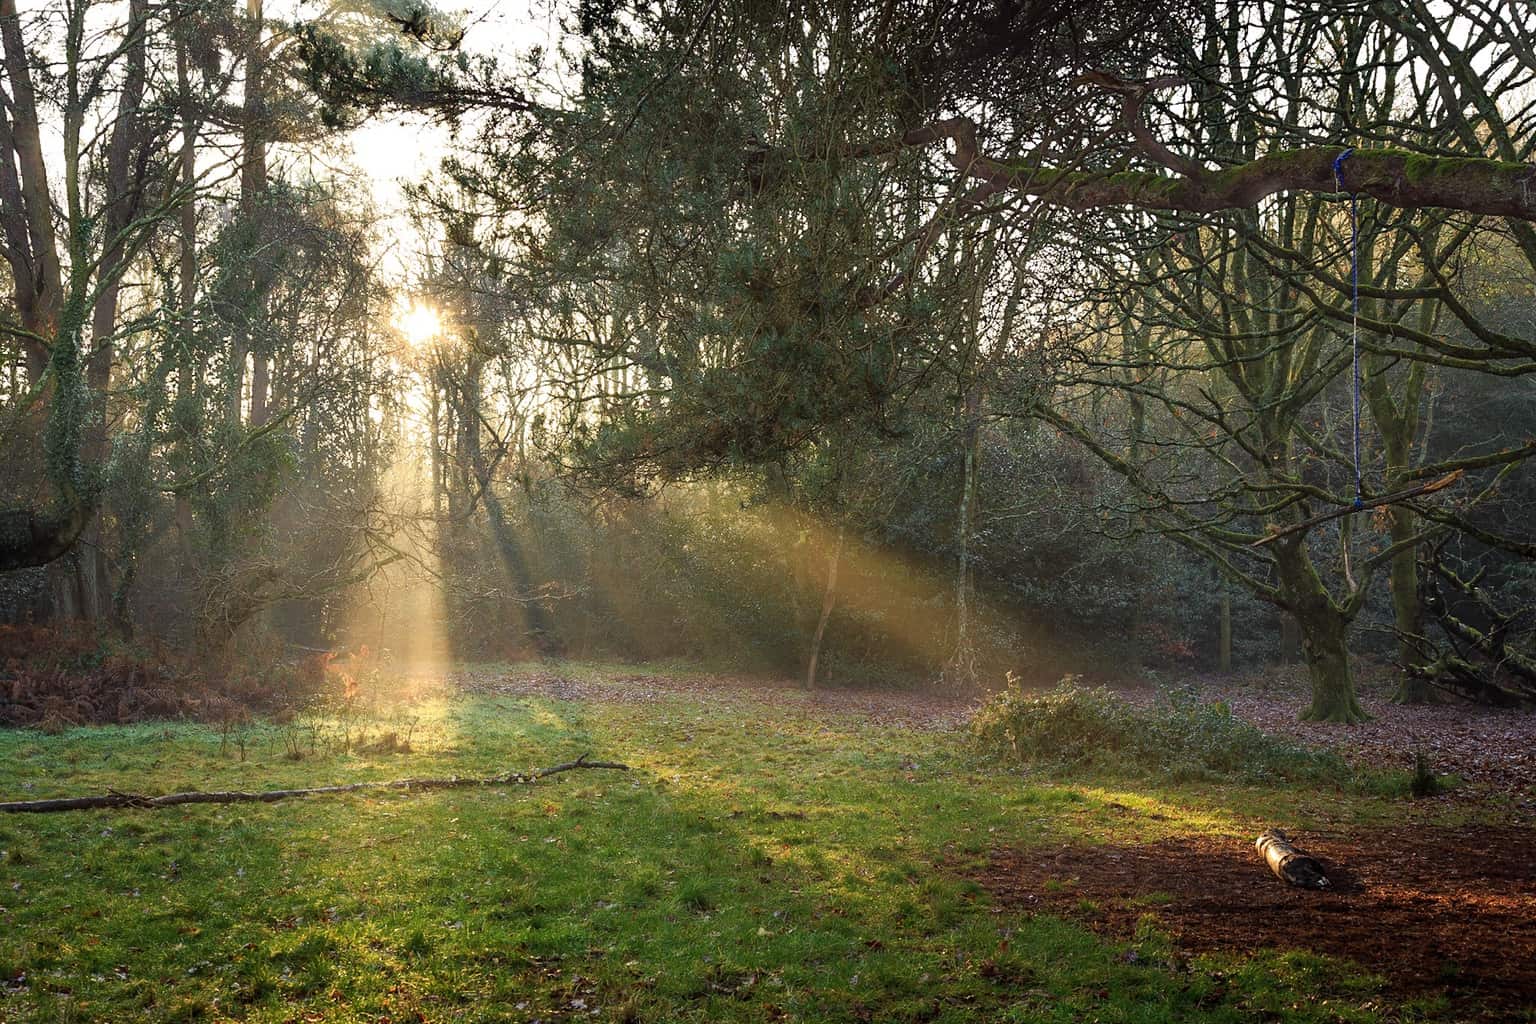  Shafts of sunlight in Delph Woods by Rick McEvoy Poole Photographer 